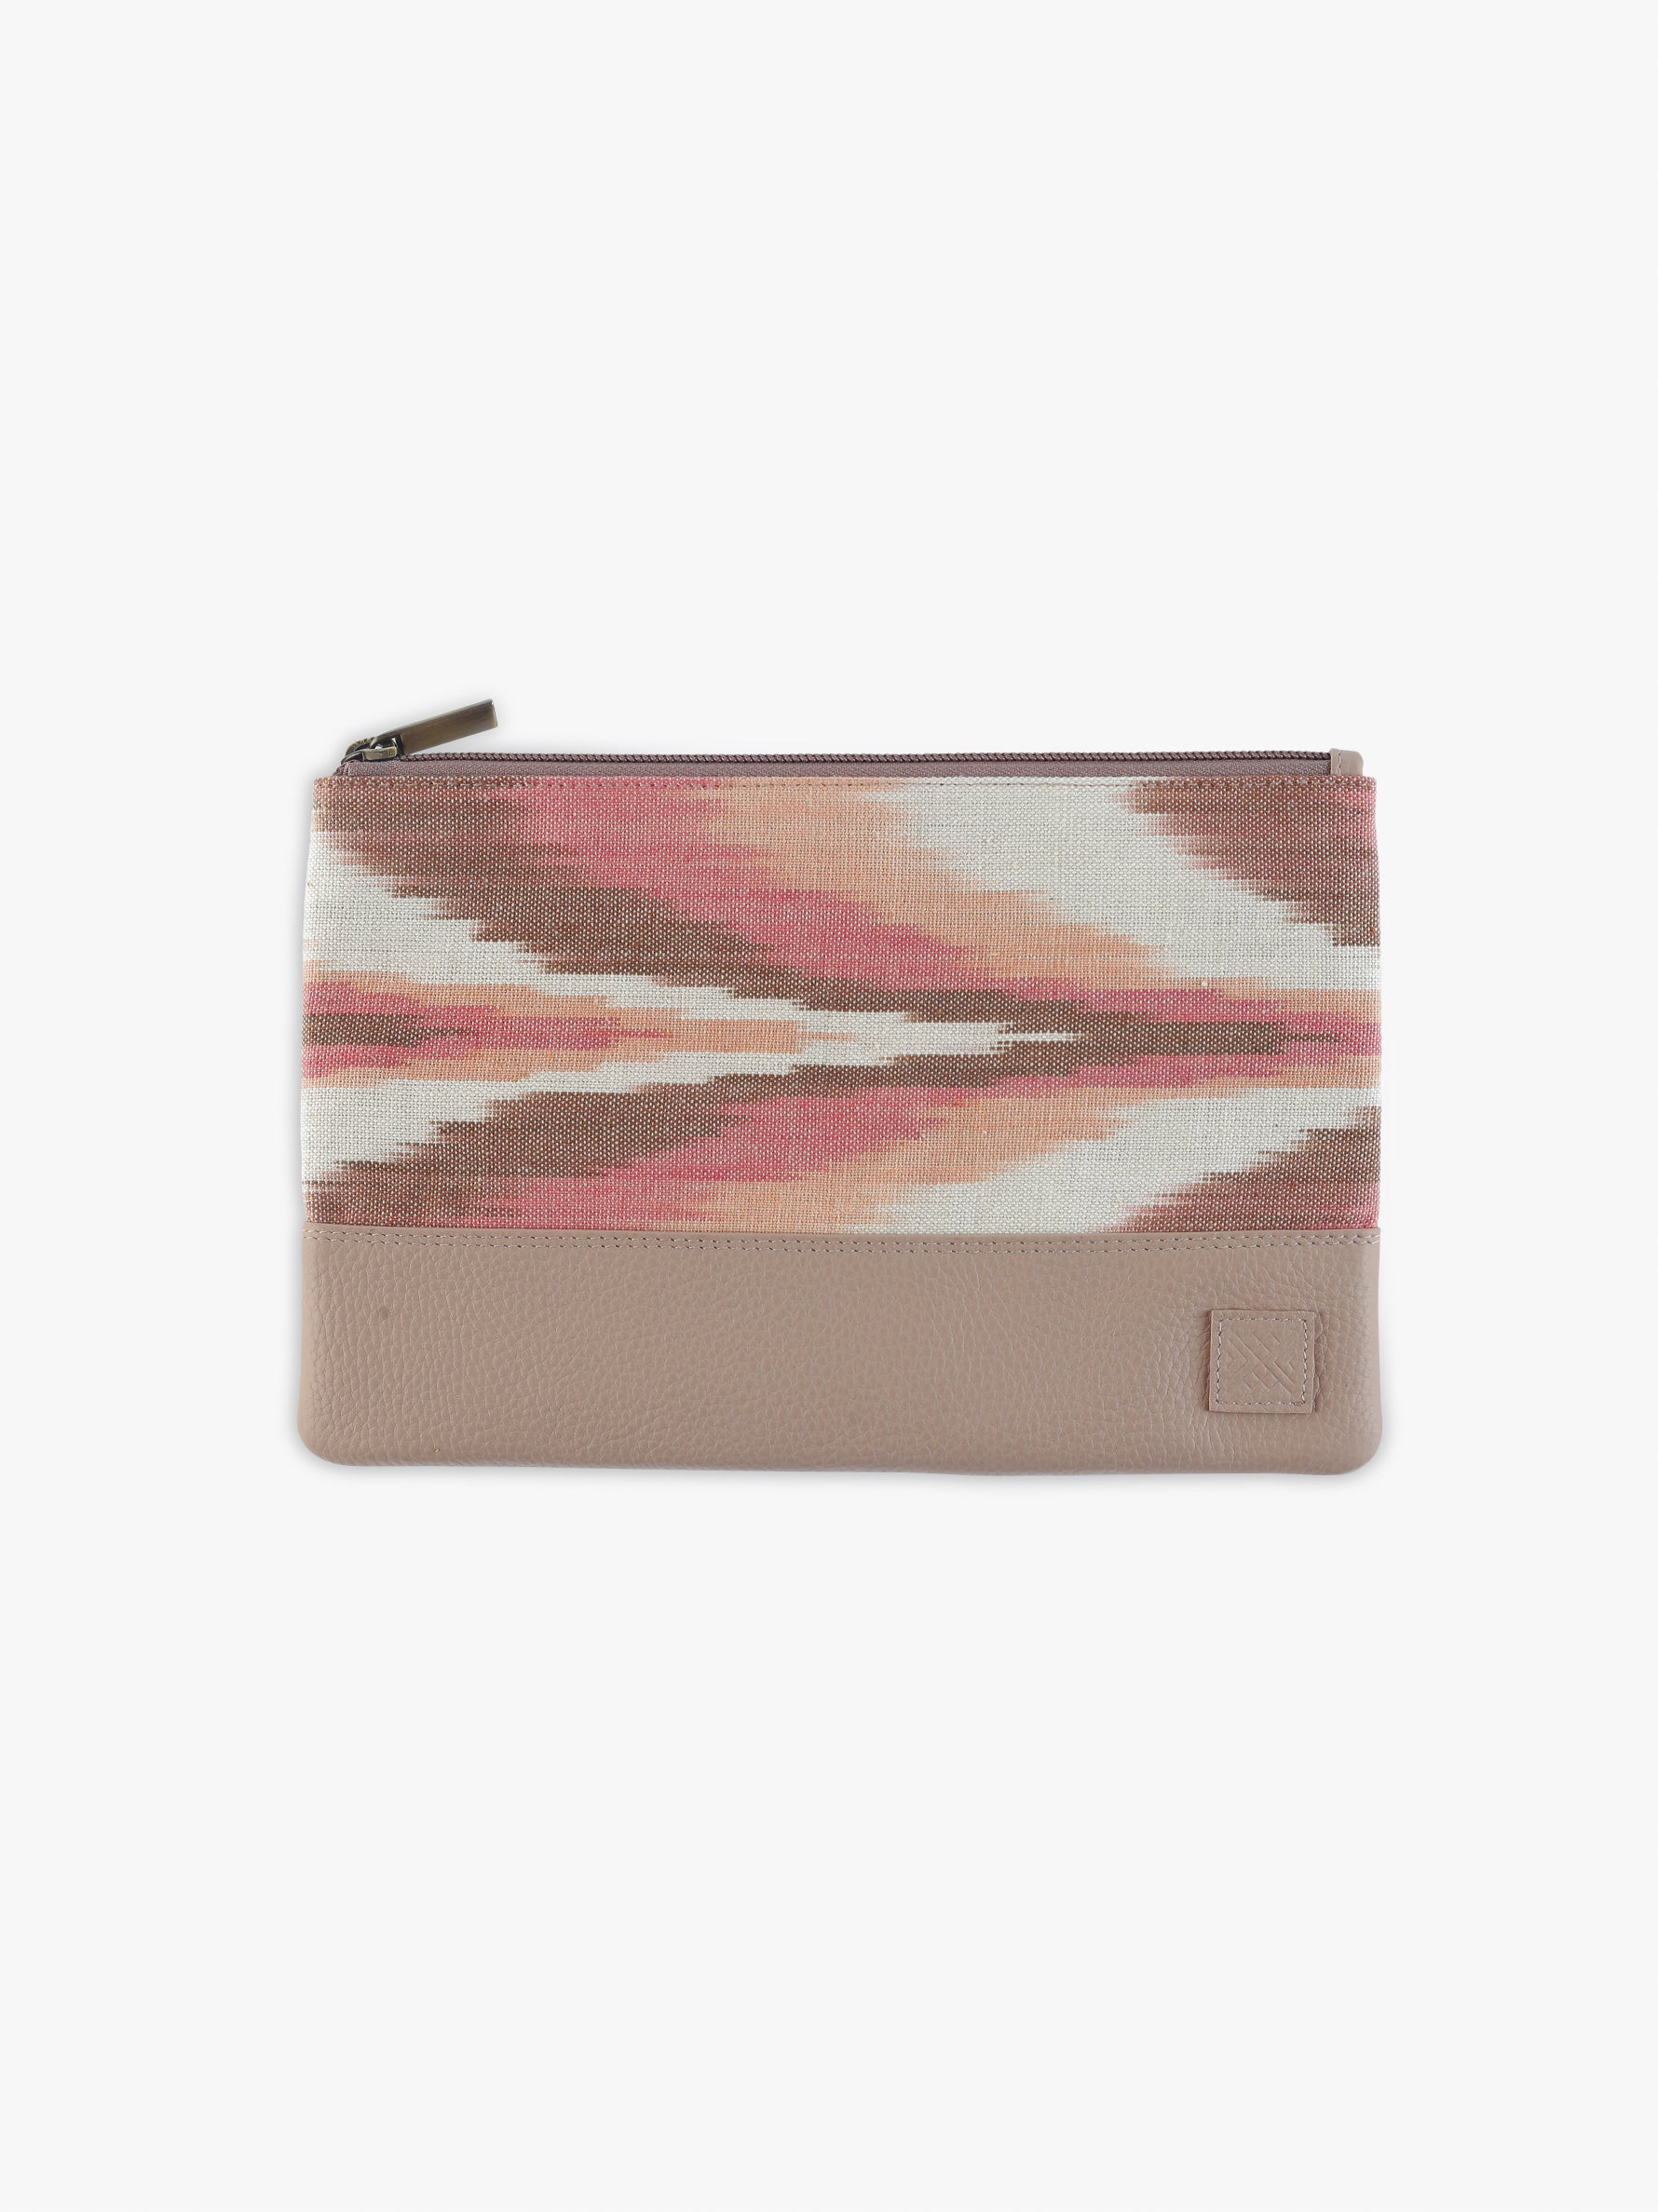 Essentials Pouch - Set of 2 (Pink & White Ikat)